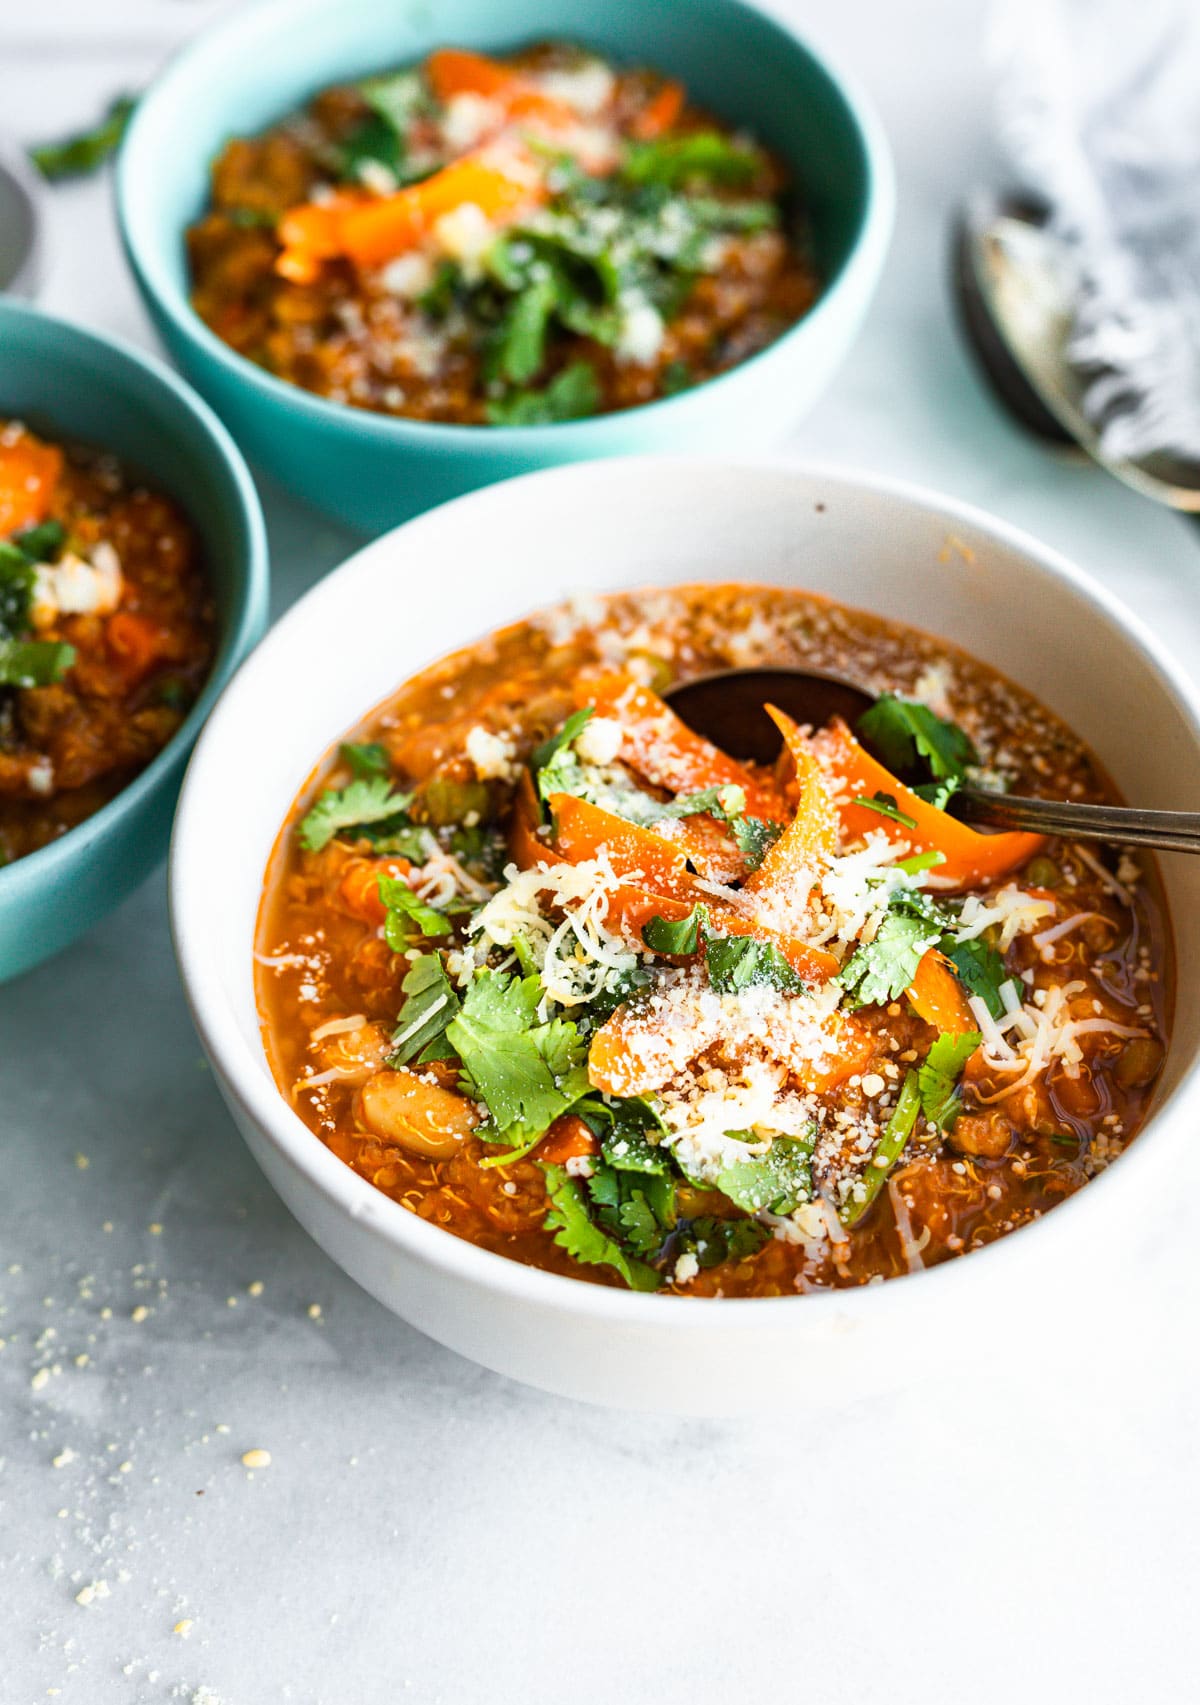 3 bowls of sausage and quinoa stew with spoon, topped with cheese, carrot shreds, and cilantro